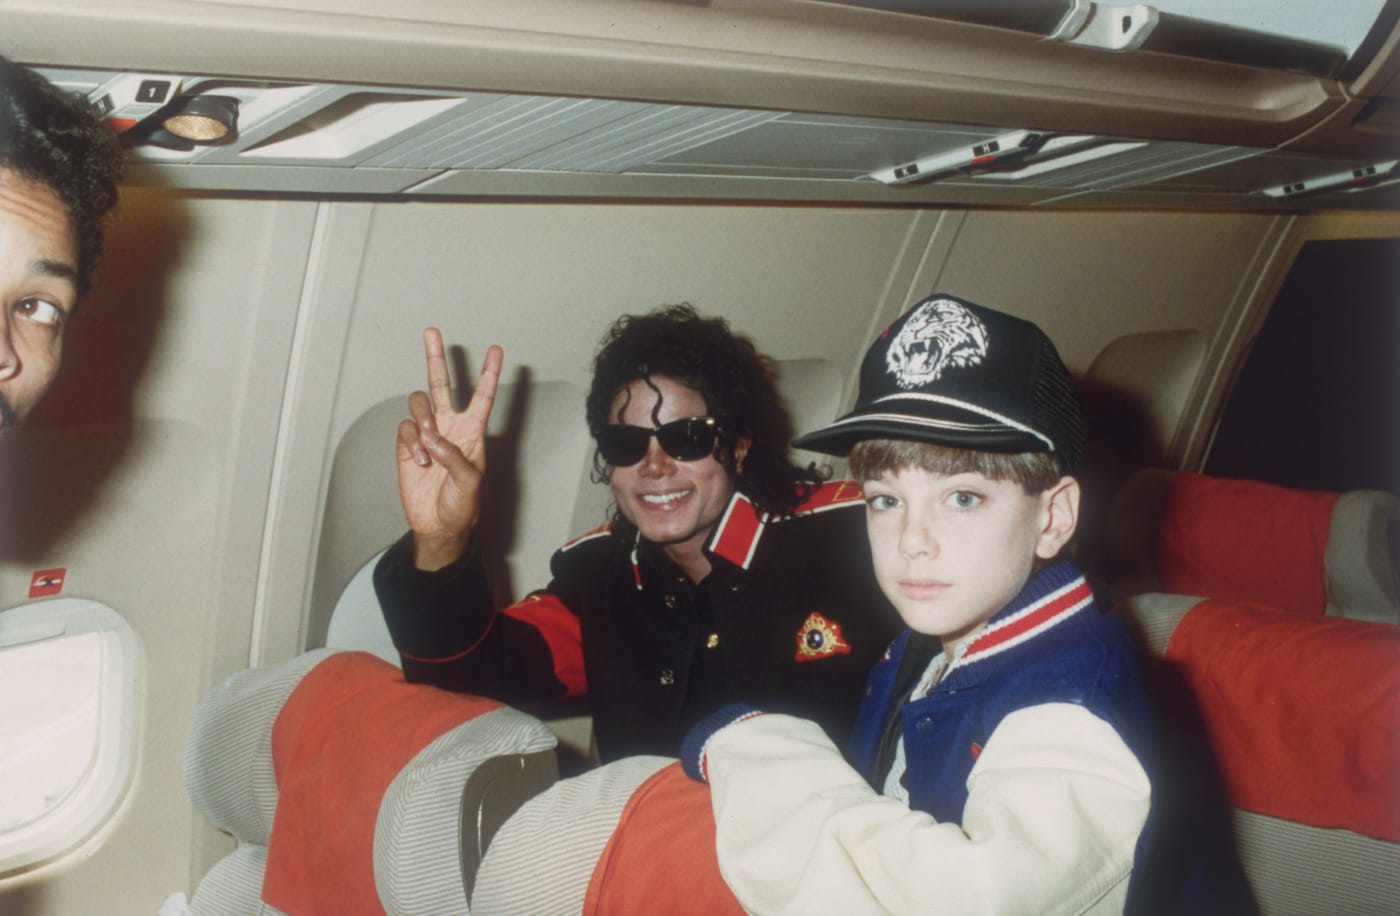 Michael Jackson with 10 year old Jimmy Safechuck on the tour plane